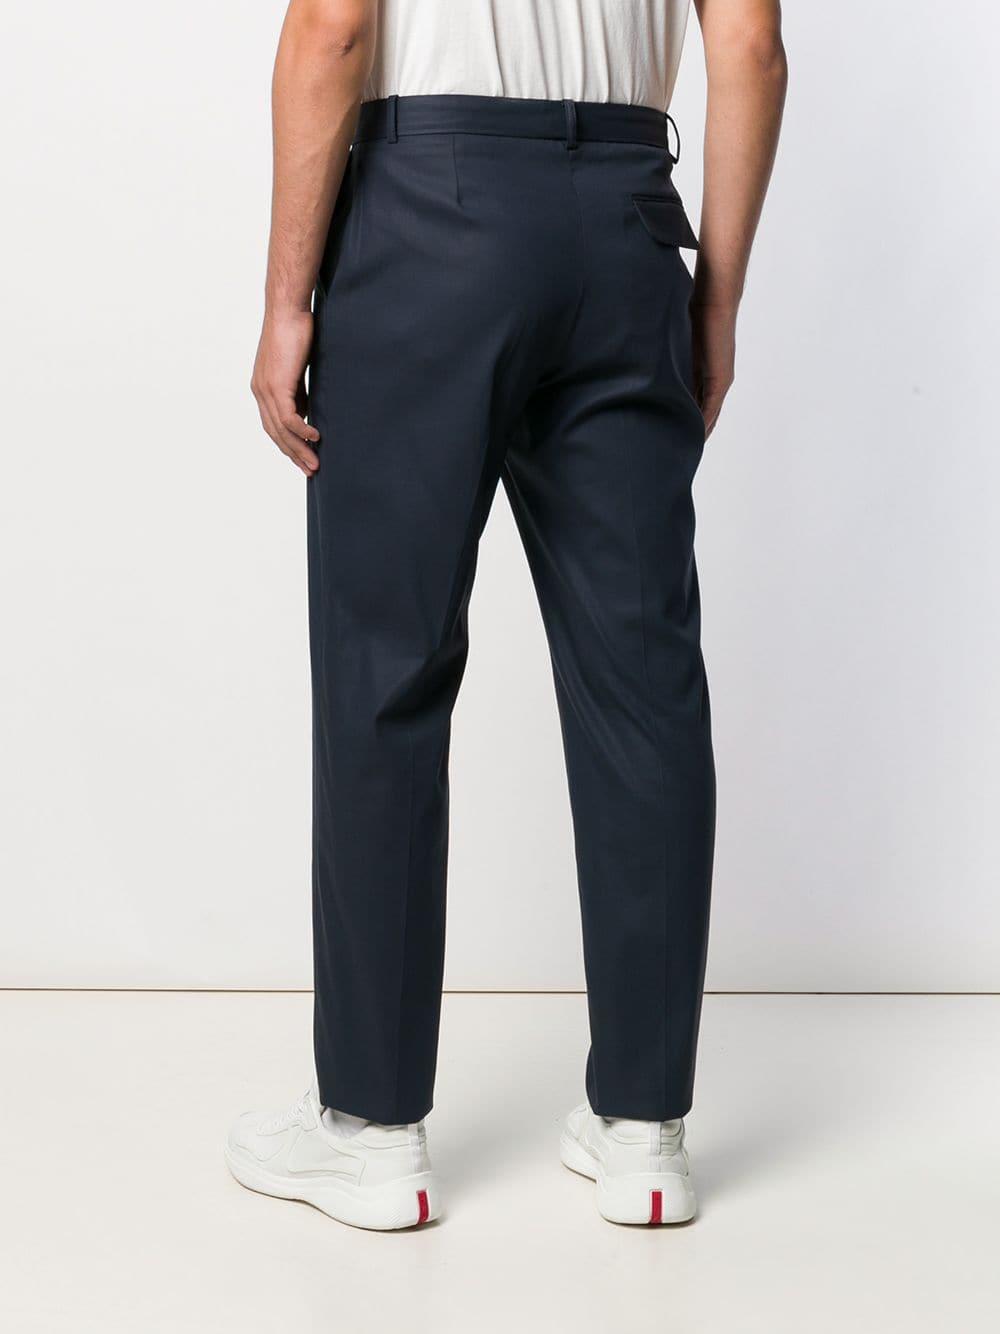 KENZO Wool Slim-fit Tailored Trousers in Blue for Men - Lyst